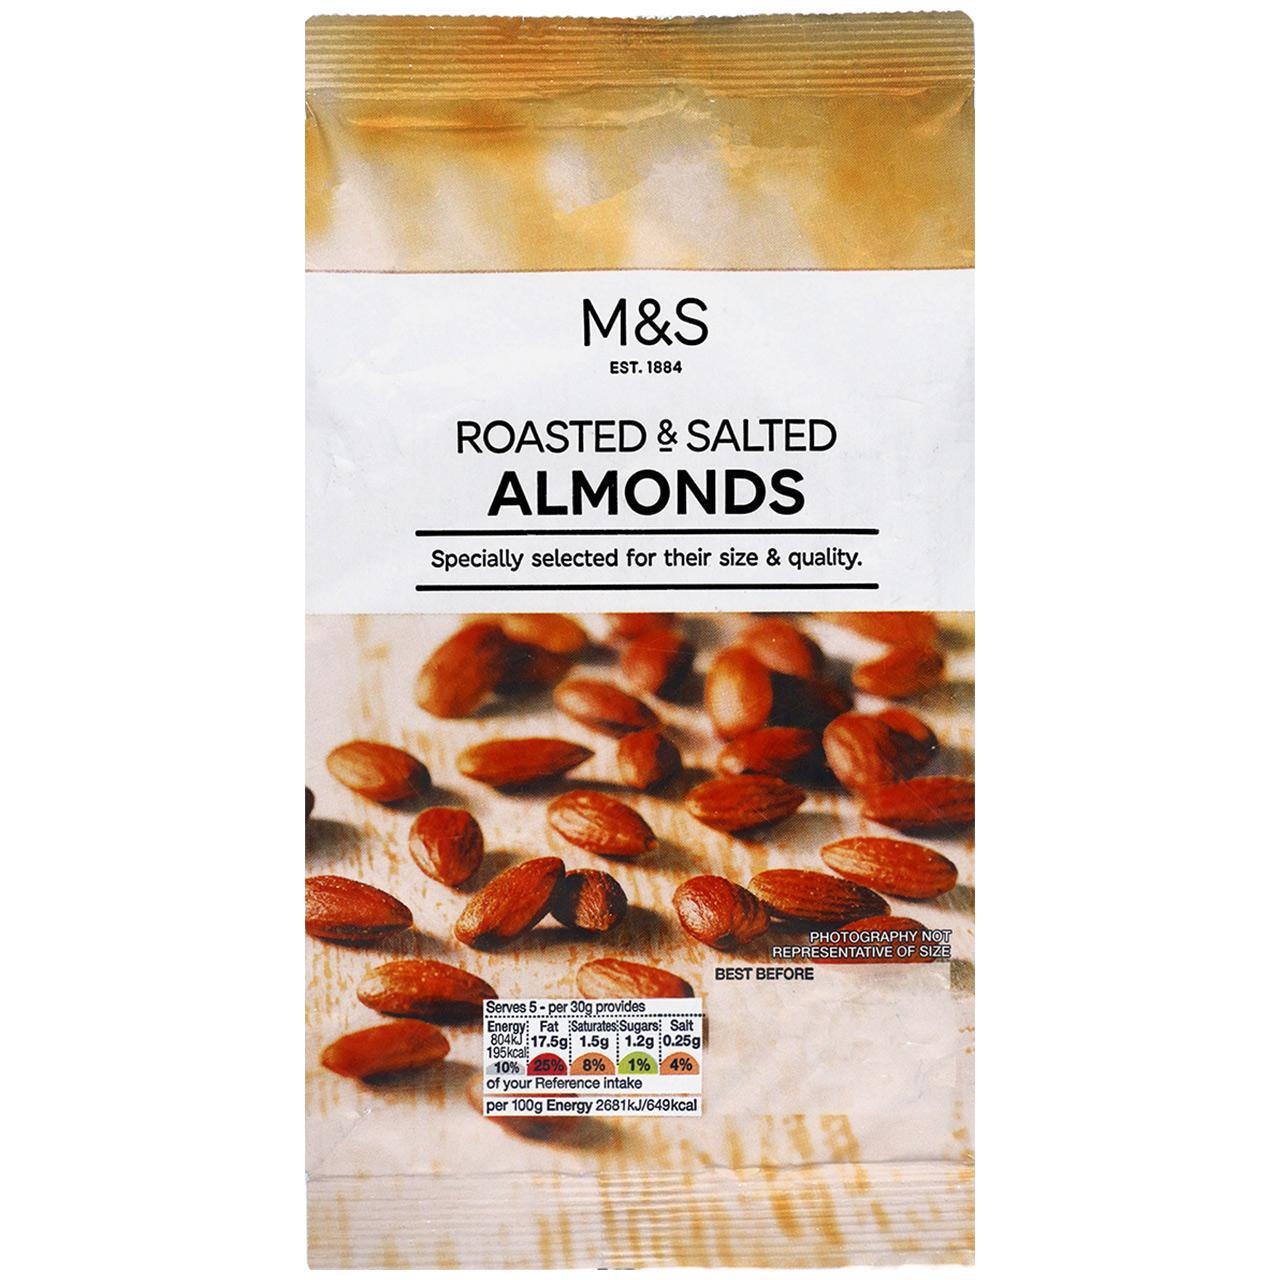 M&S Roasted & Salted Almonds 150g